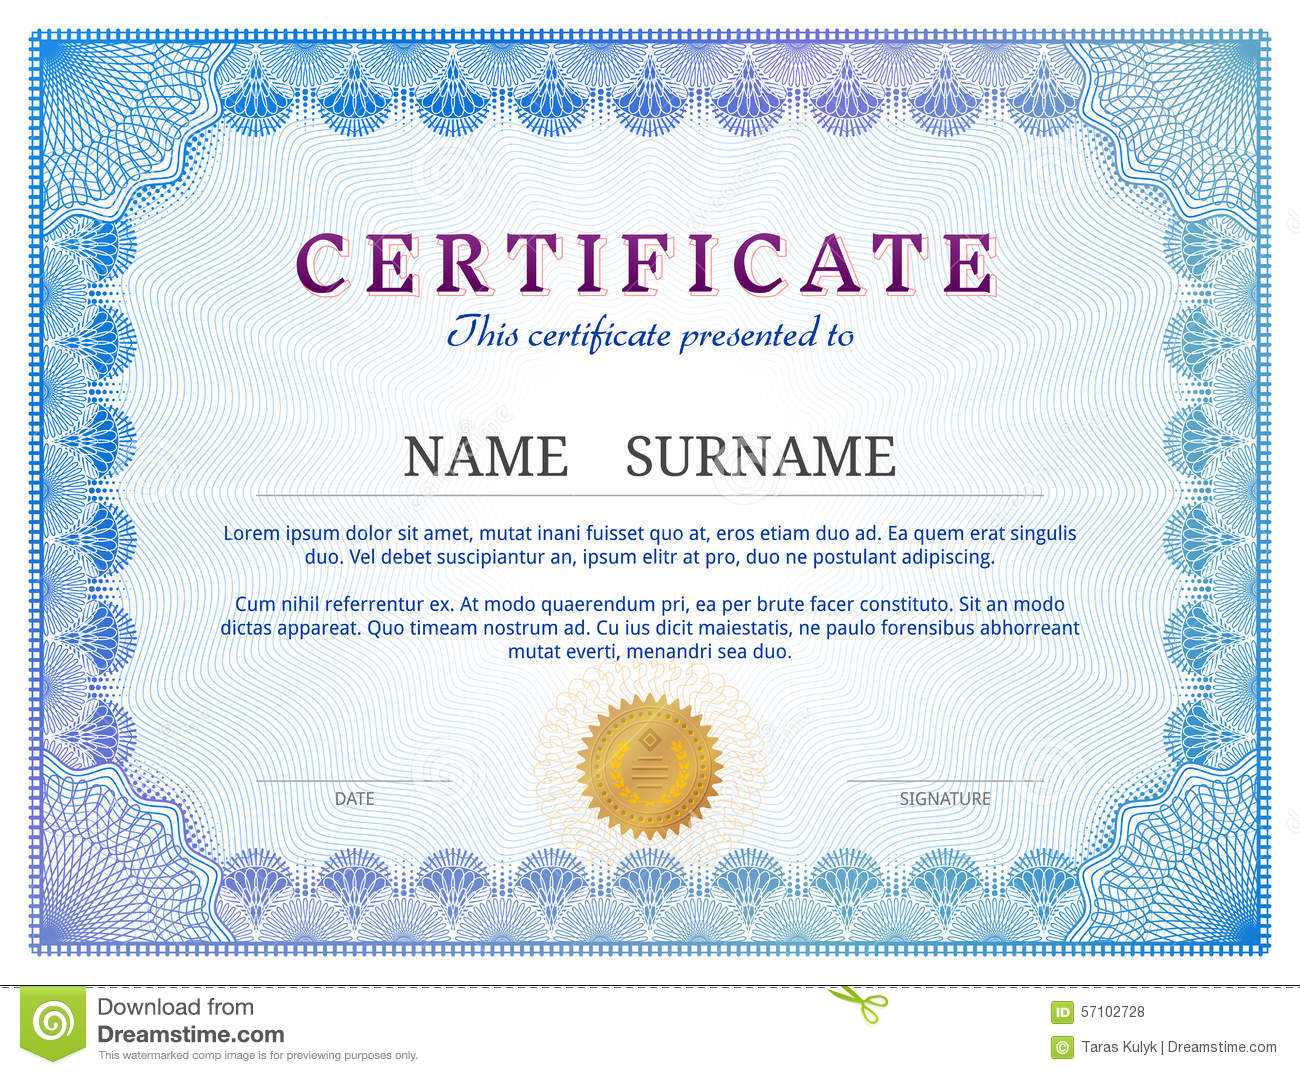 Certificate Template With Guilloche Elements Stock Vector With Validation Certificate Template